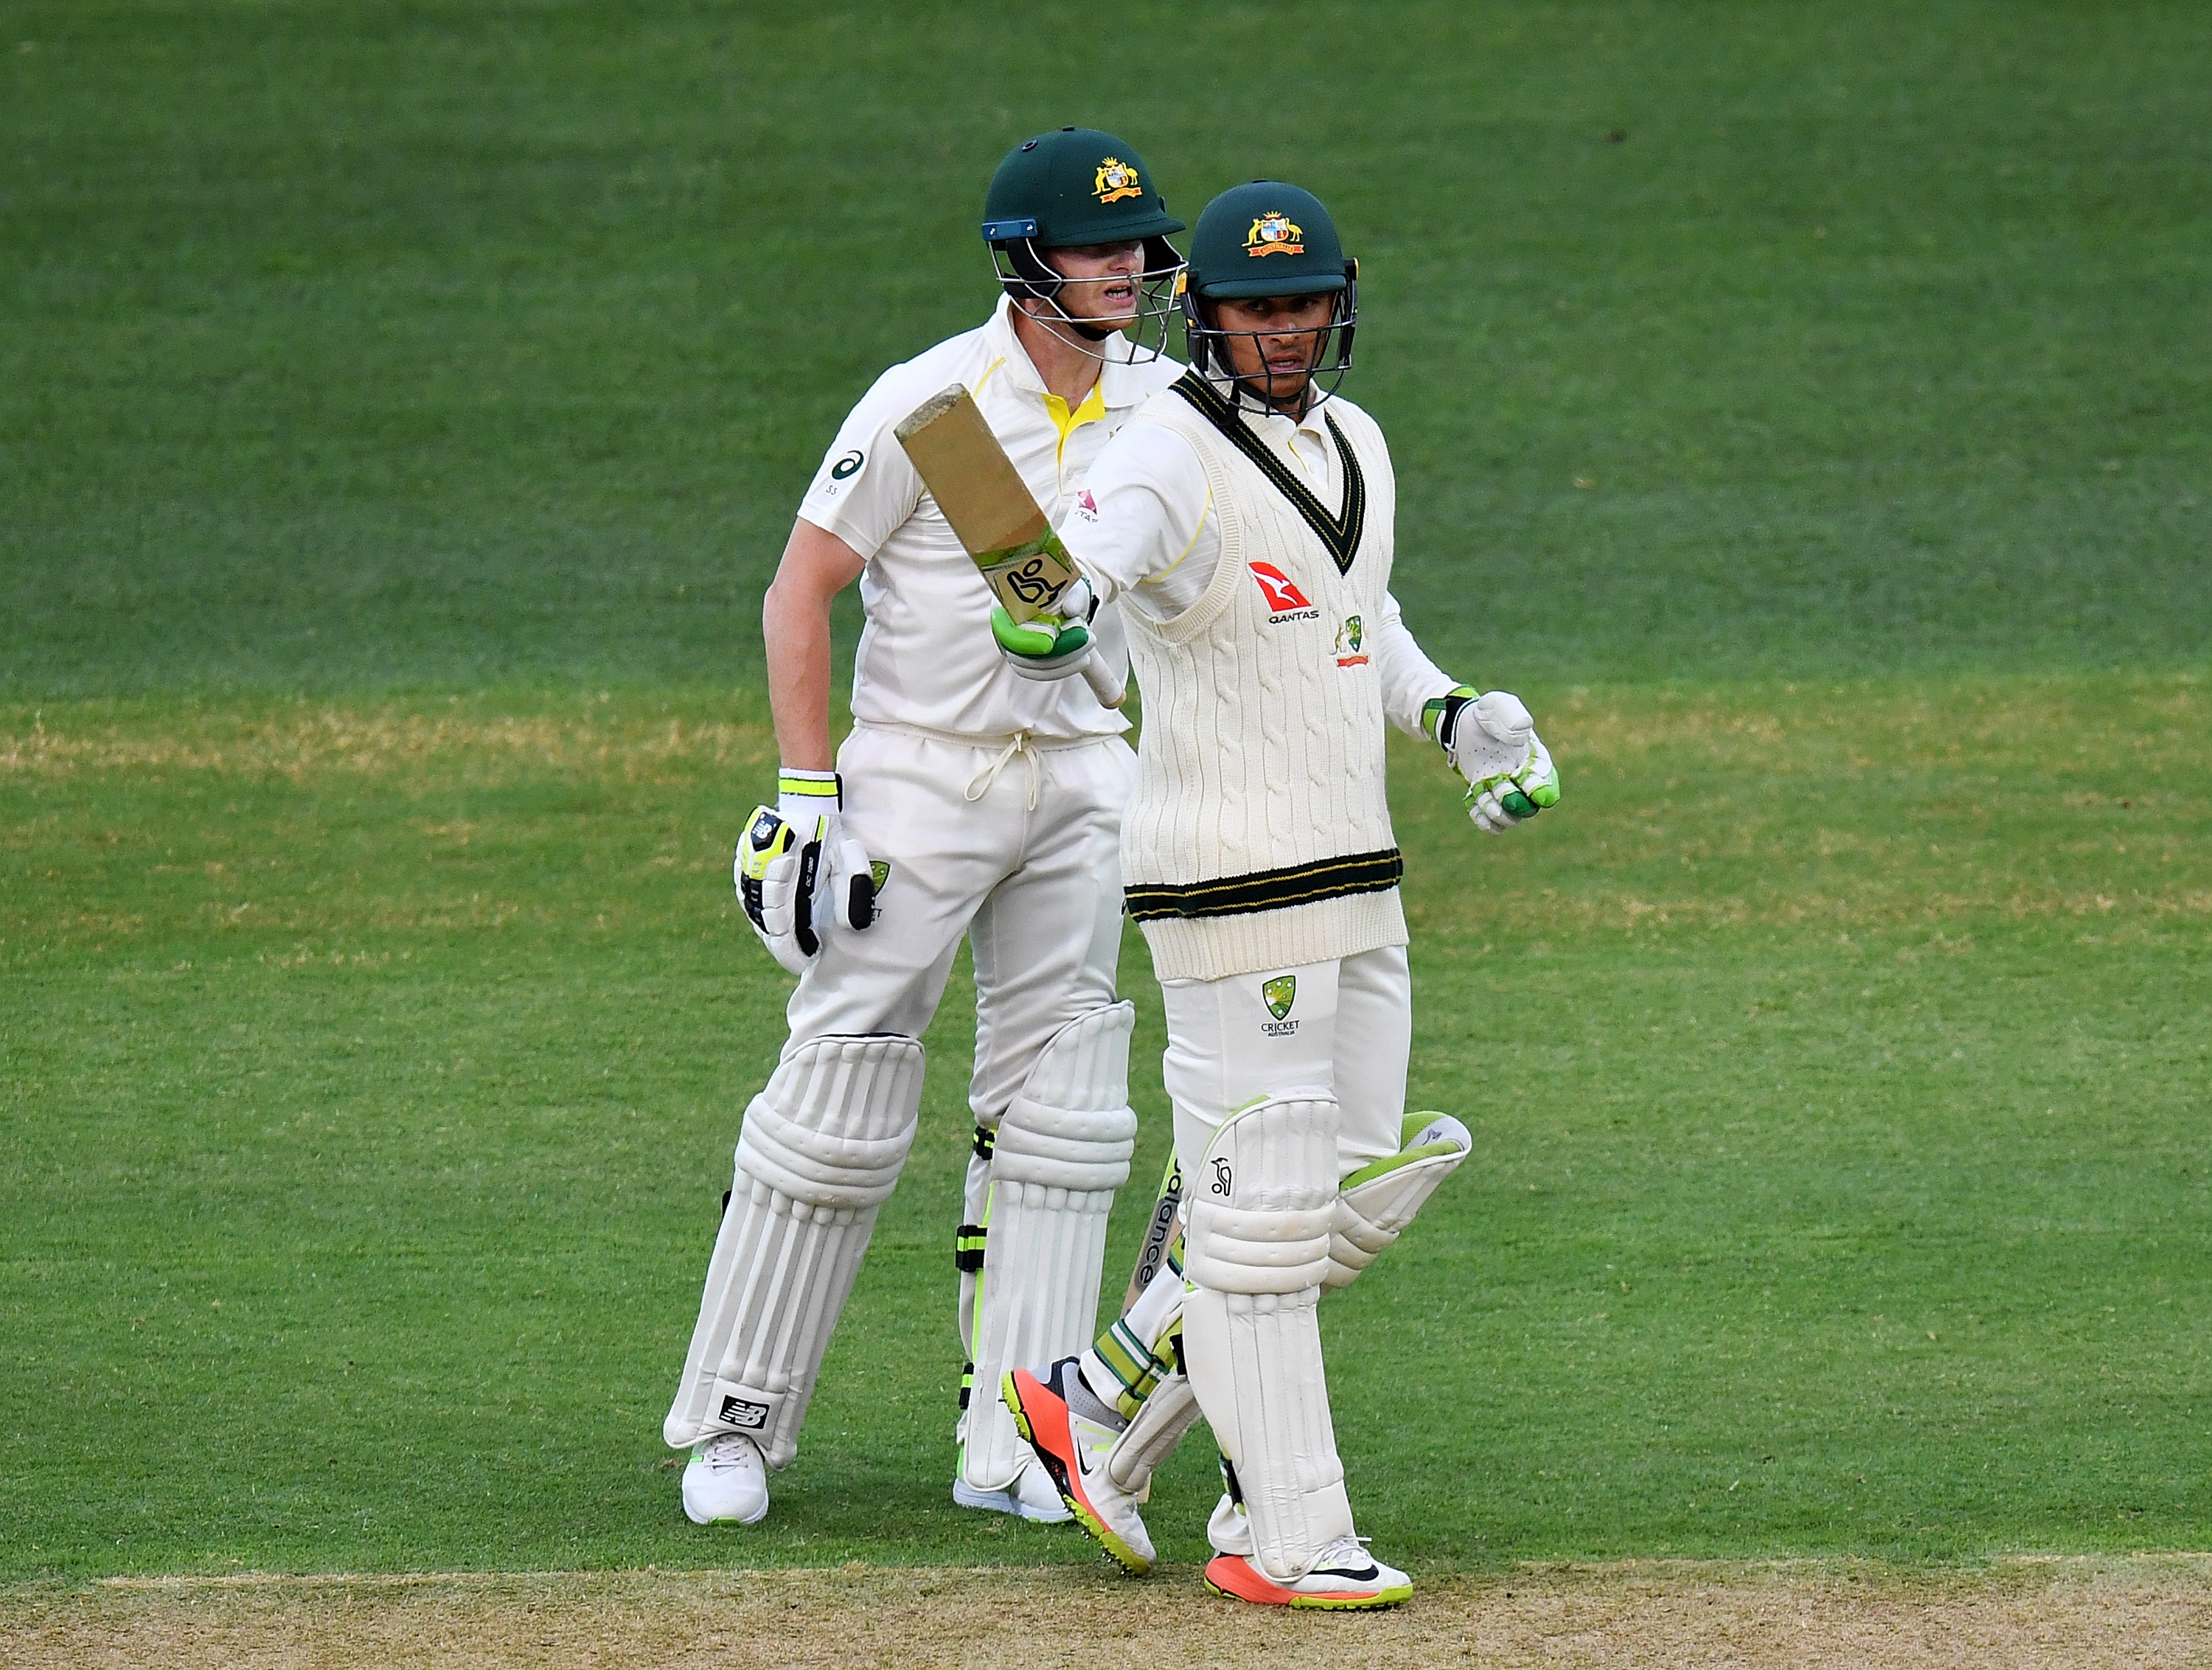 There's no reason why Steve Smith shouldn't be in line for the captaincy, feels Usman Khawaja